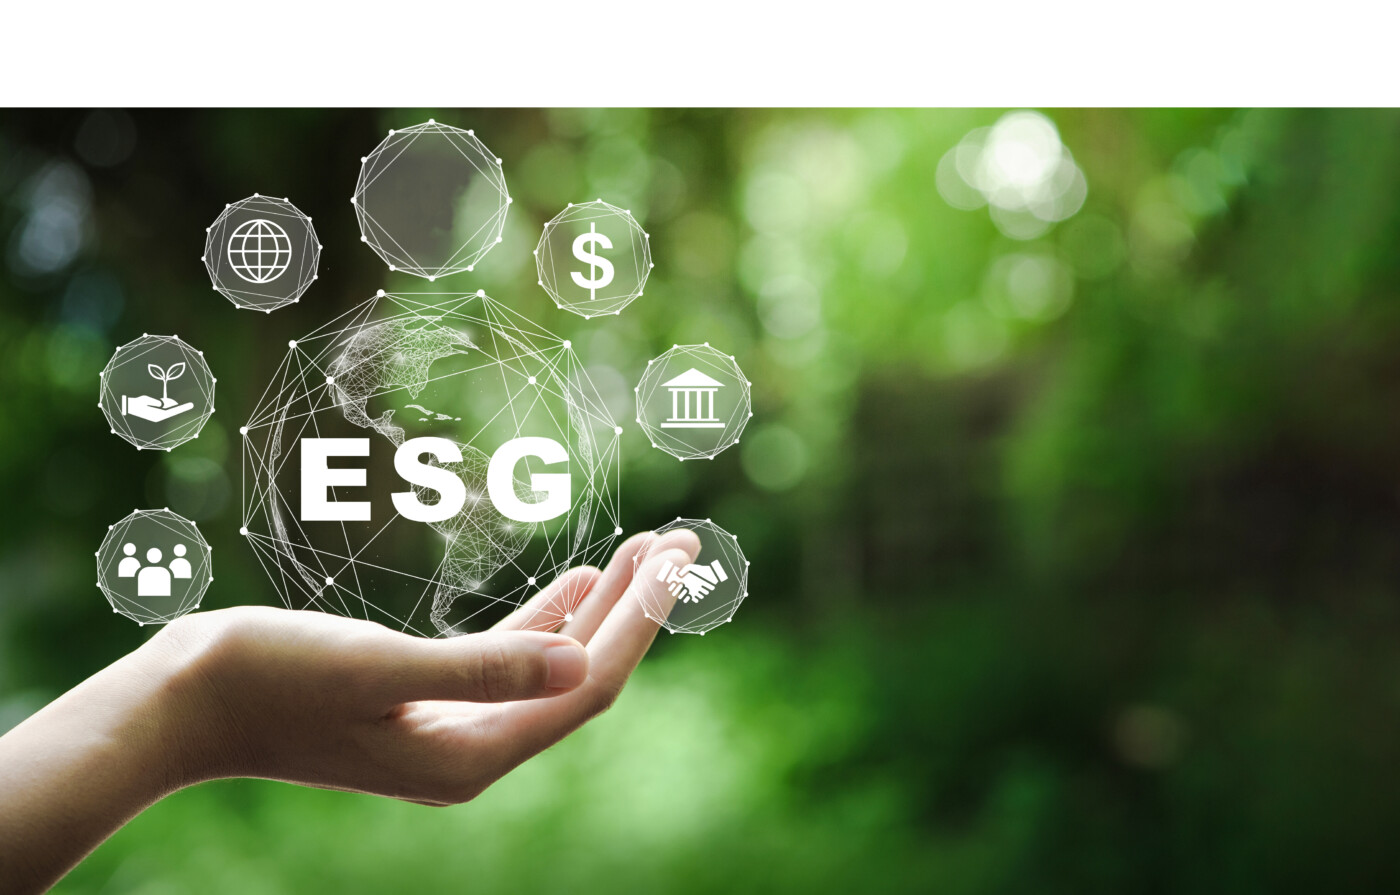 Esg,Icon,Concept,In,The,Hand,For,Environmental,,Social,,And